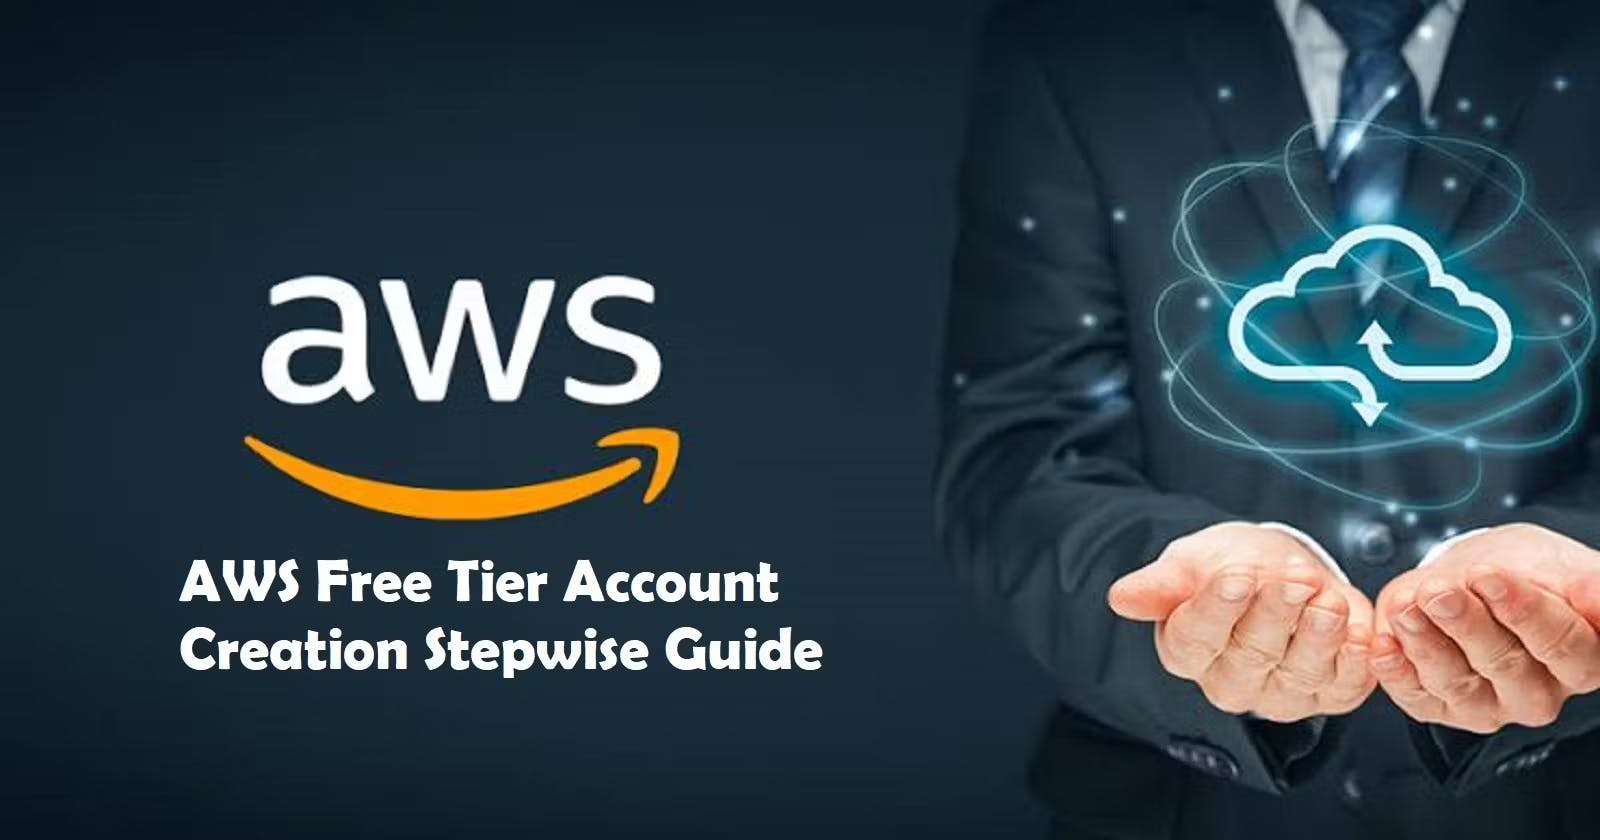 "How to create an AWS Free Account: A Step by Step Guide"